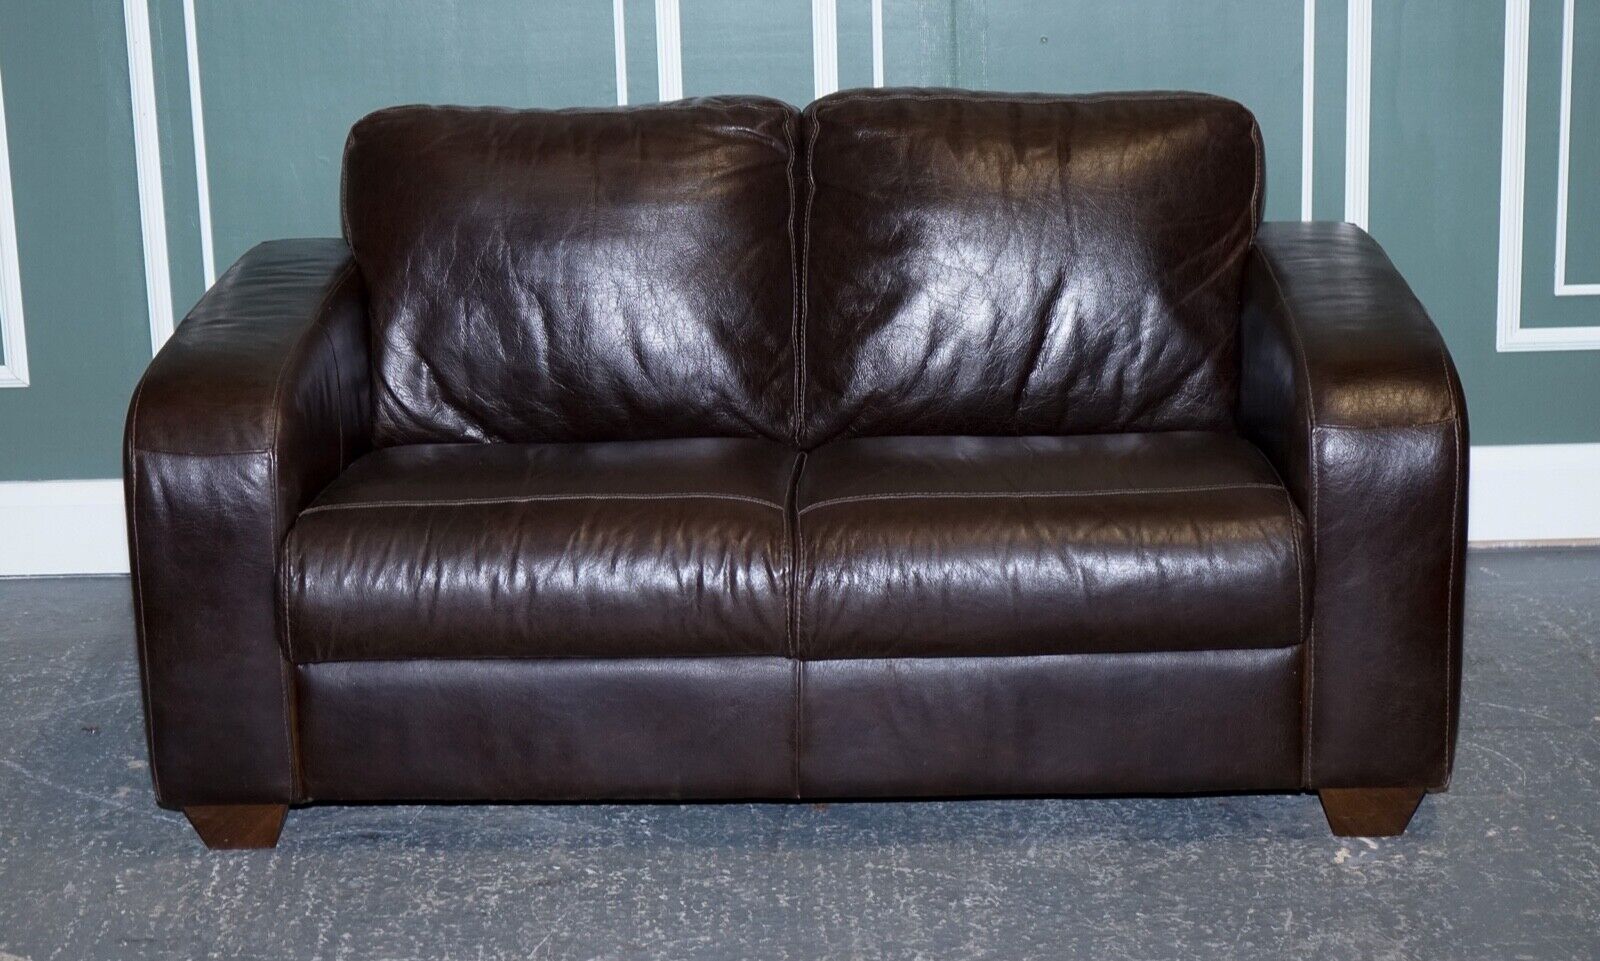 VINTAGE CHOCOLATE BROWN LEATHER TWO SEATER SOFA BY SOFITALIA